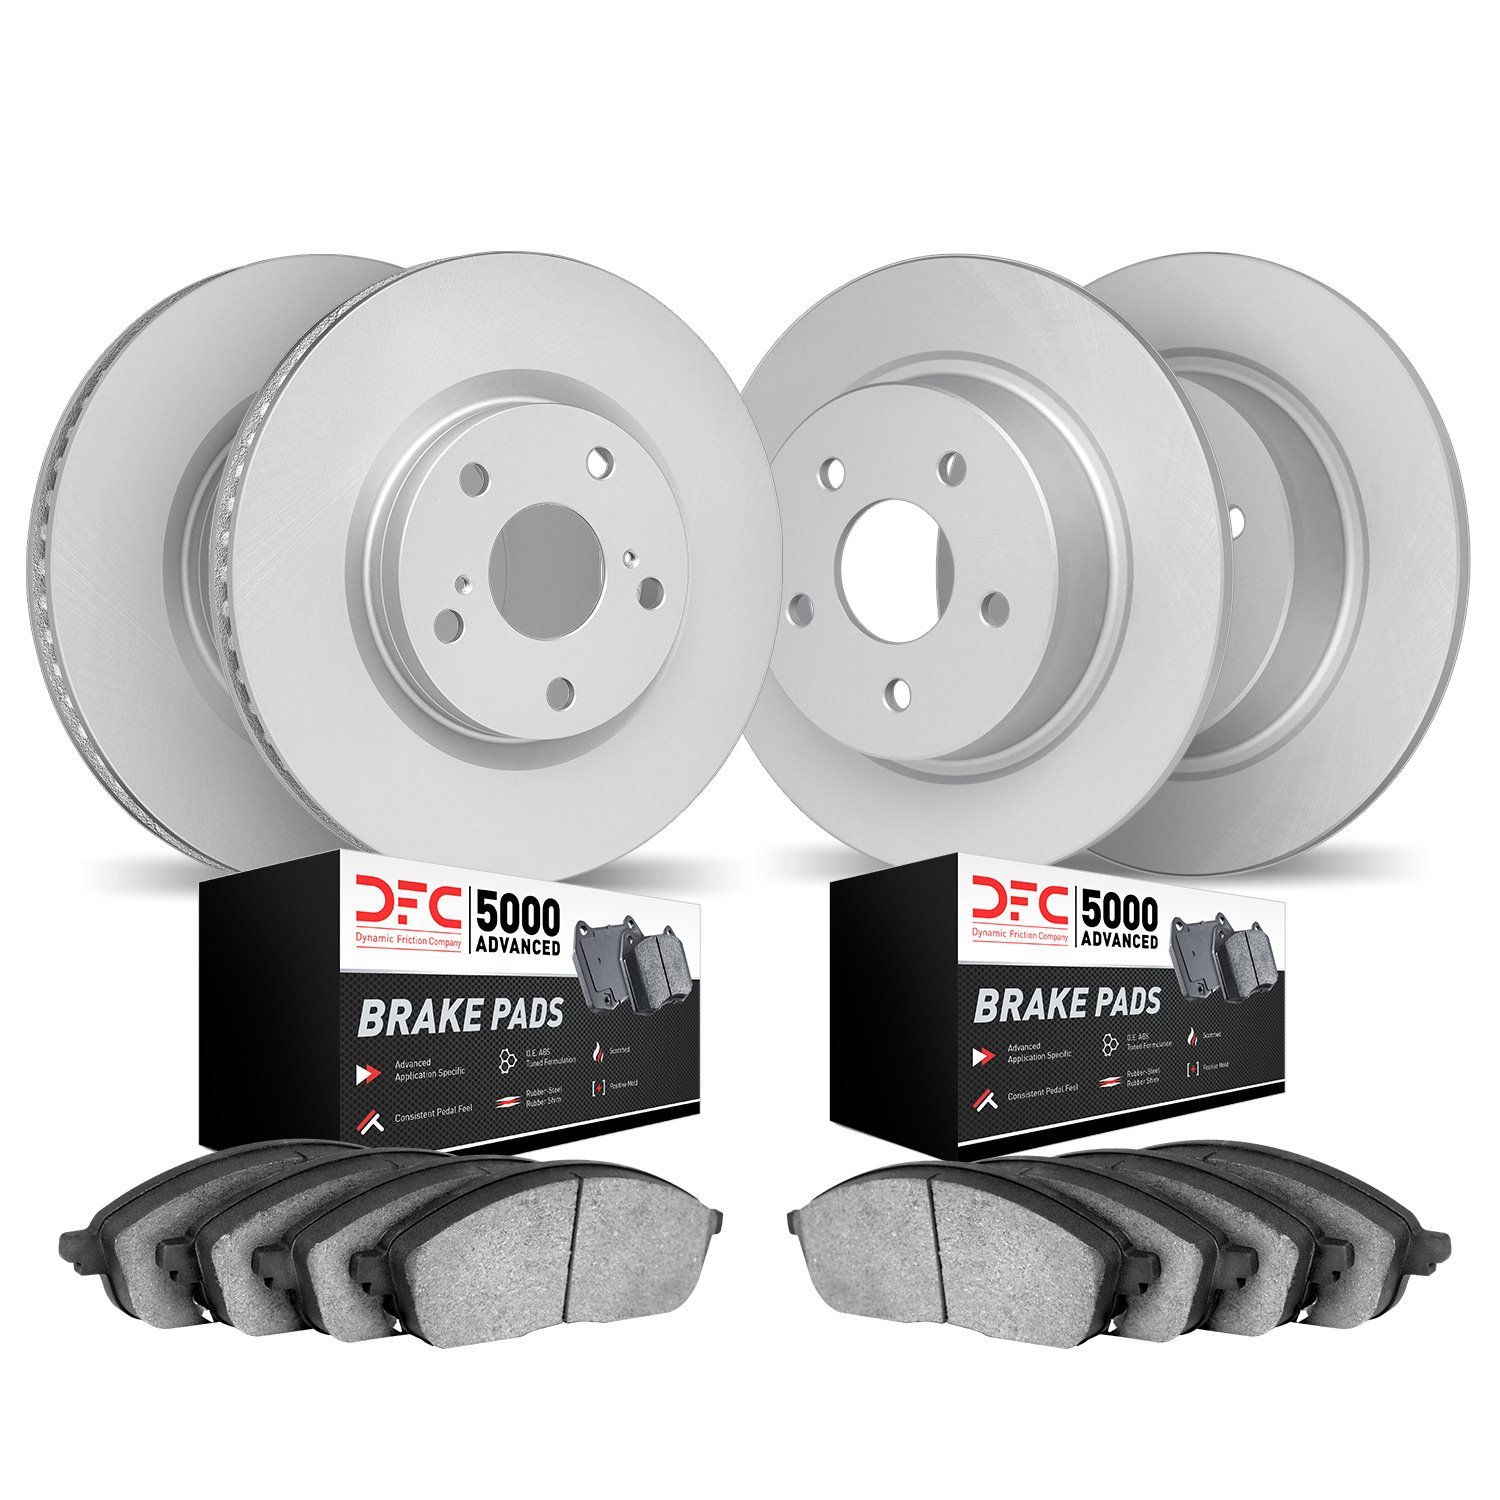 4504-63089 Geospec Brake Rotors w/5000 Advanced Brake Pads Kit, 2014-2017 Mercedes-Benz, Position: Front and Rear